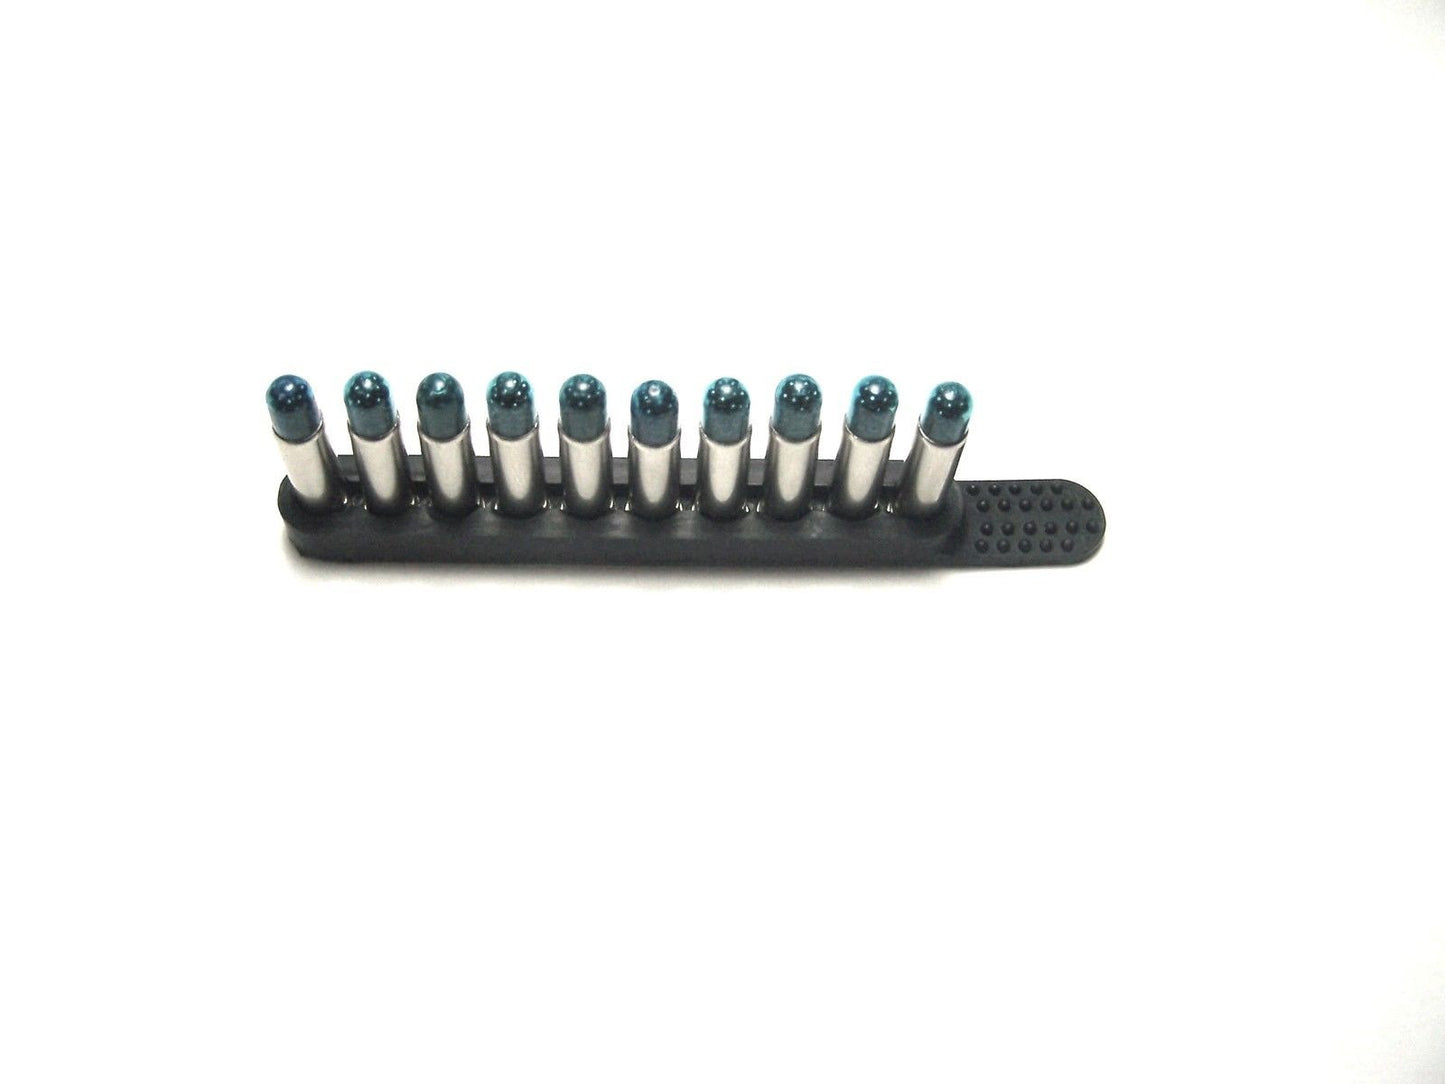 Magazine Loader Ammo Strip Kit Smith and Wesson 41 422 622 2206 22A .22 LRA